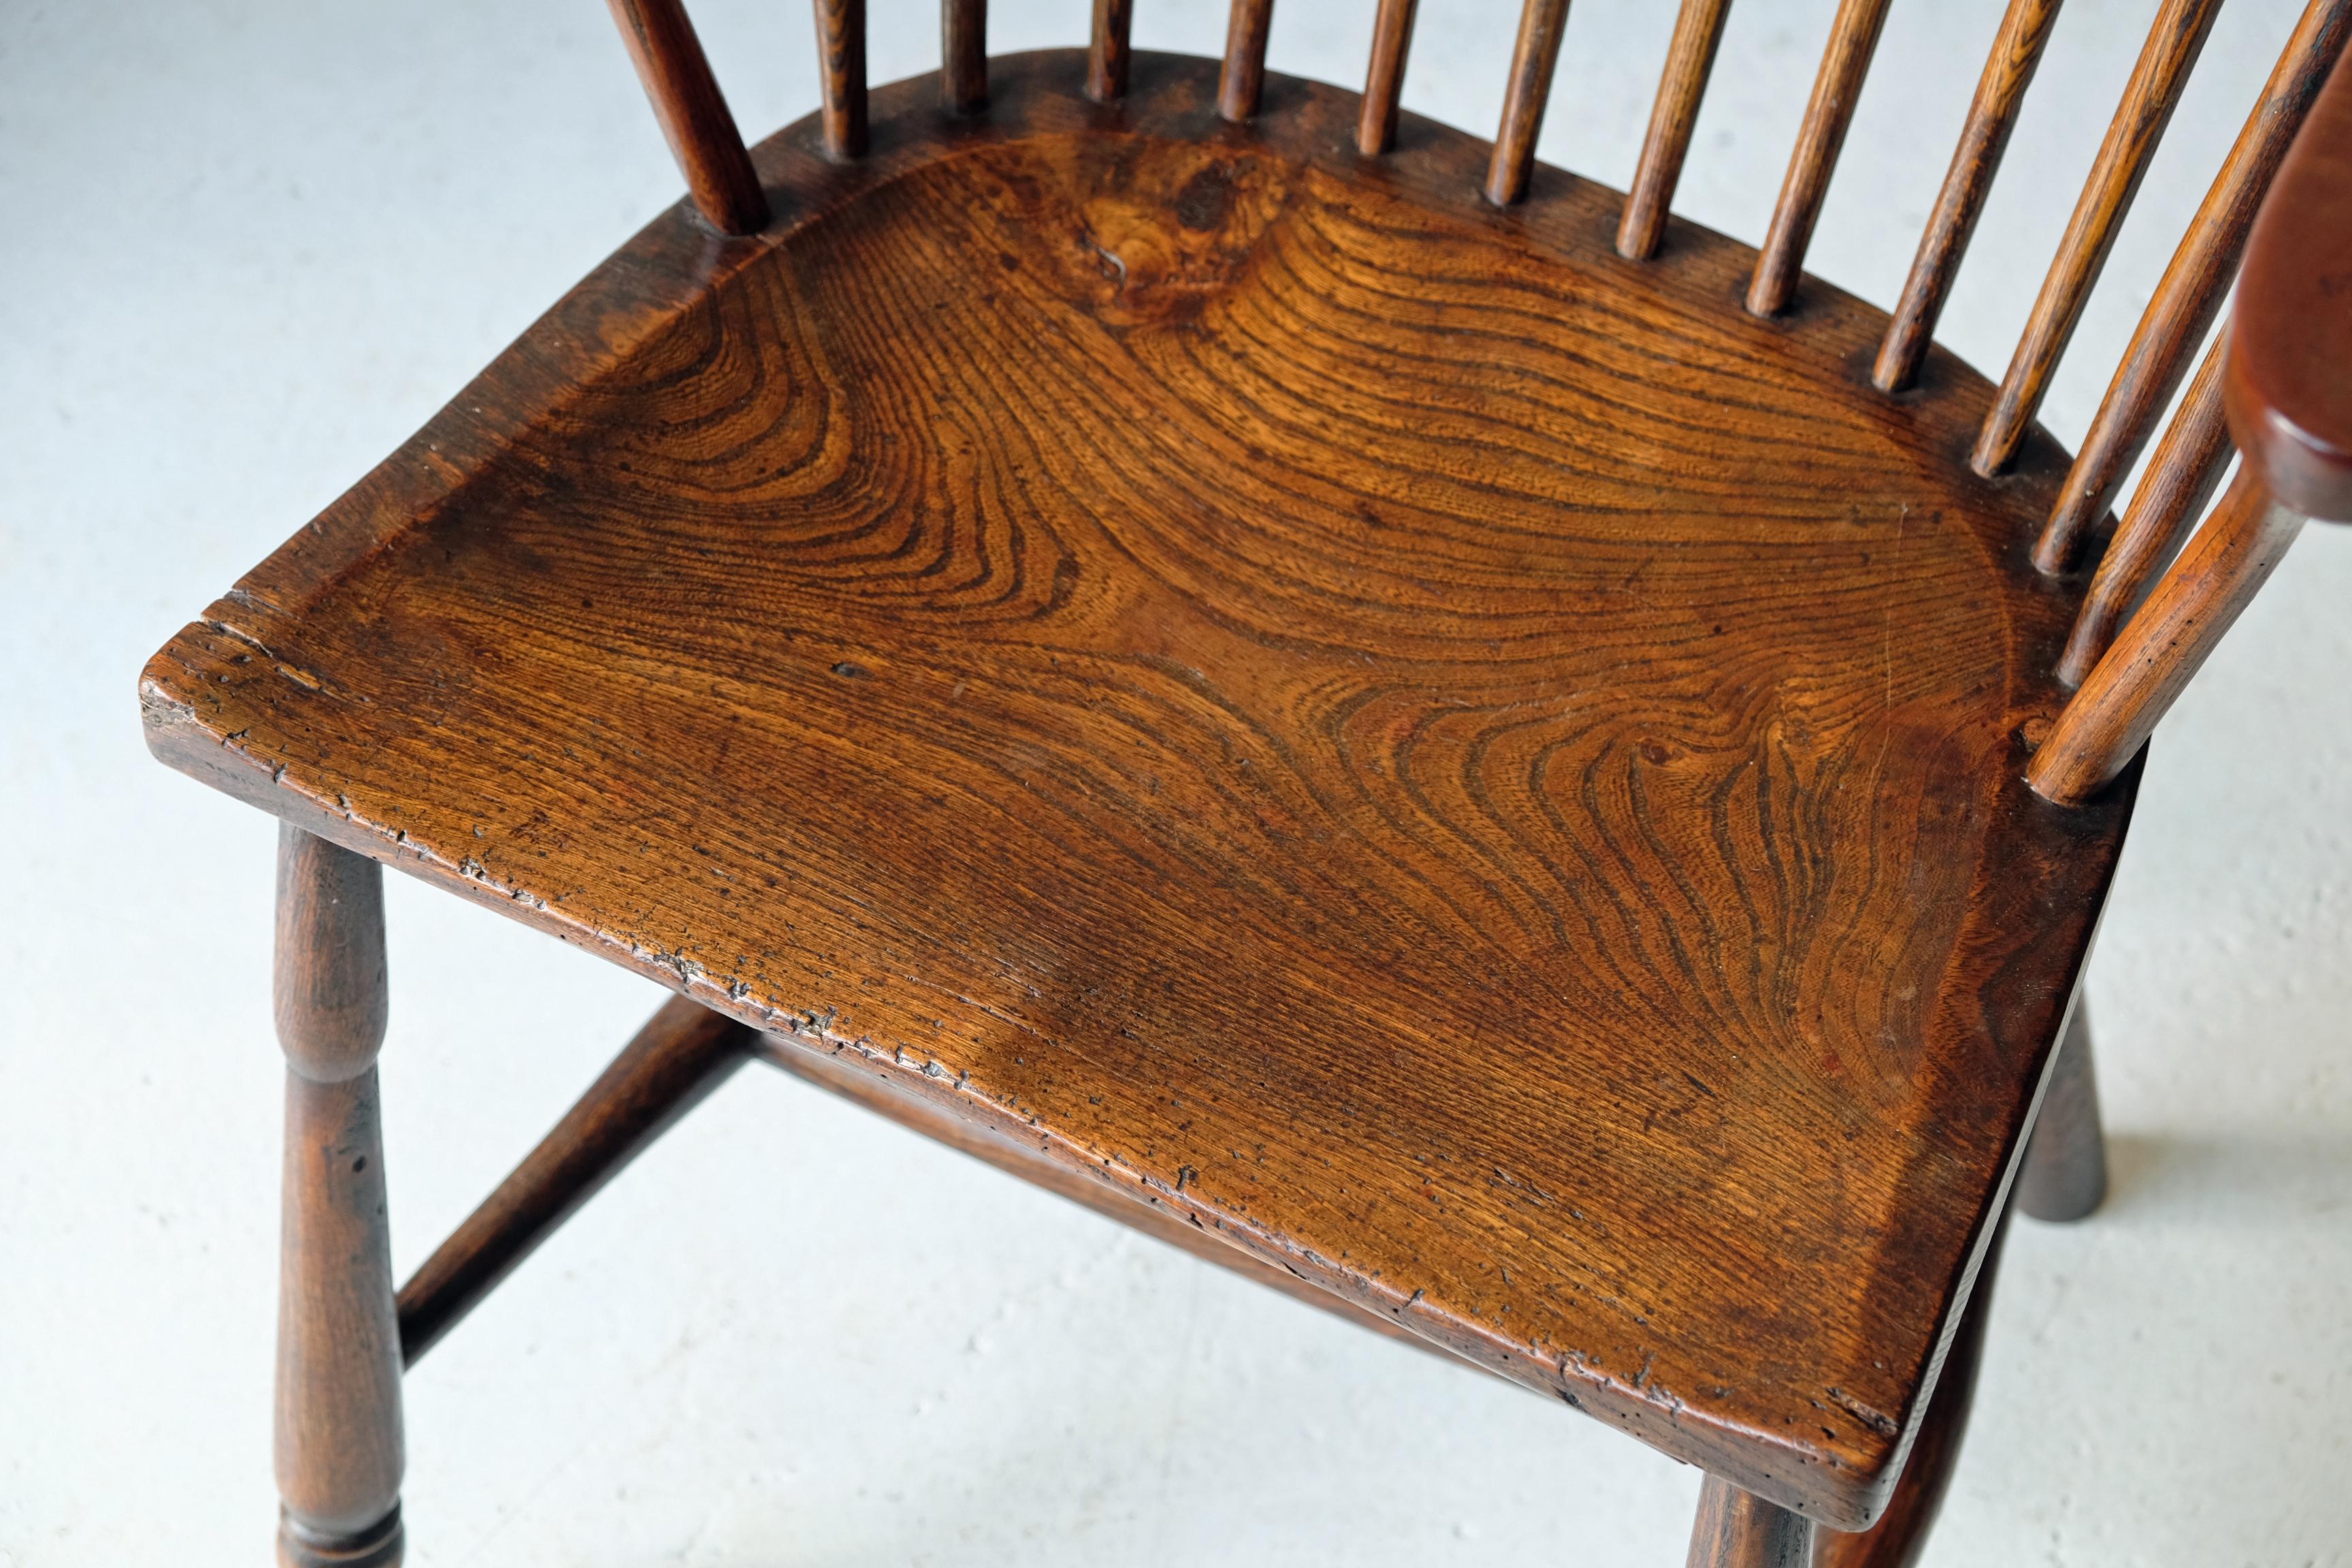 Simple and charming Windsor chair of West Country origin with shaped elm seat, beech and ash arms and hand-drawn spindles. Egg and reel turned front legs, simple plain tapered back legs, united by H stretcher. Lovely rich color with nice patination.